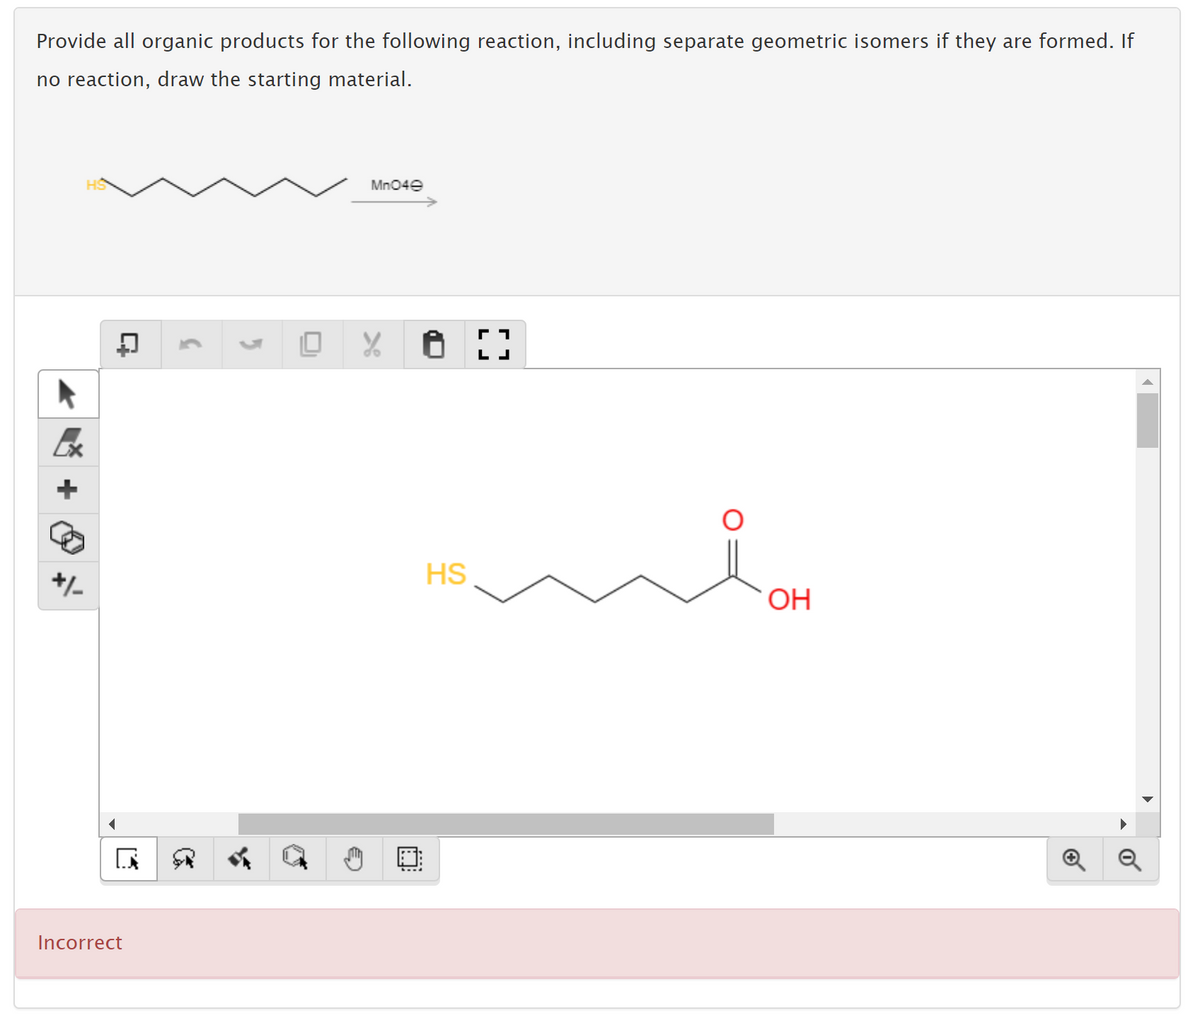 Provide all organic products for the following reaction, including separate geometric isomers if they are formed. If
no reaction, draw the starting material.
Mn04e
+/-
HS
OH
Incorrect
